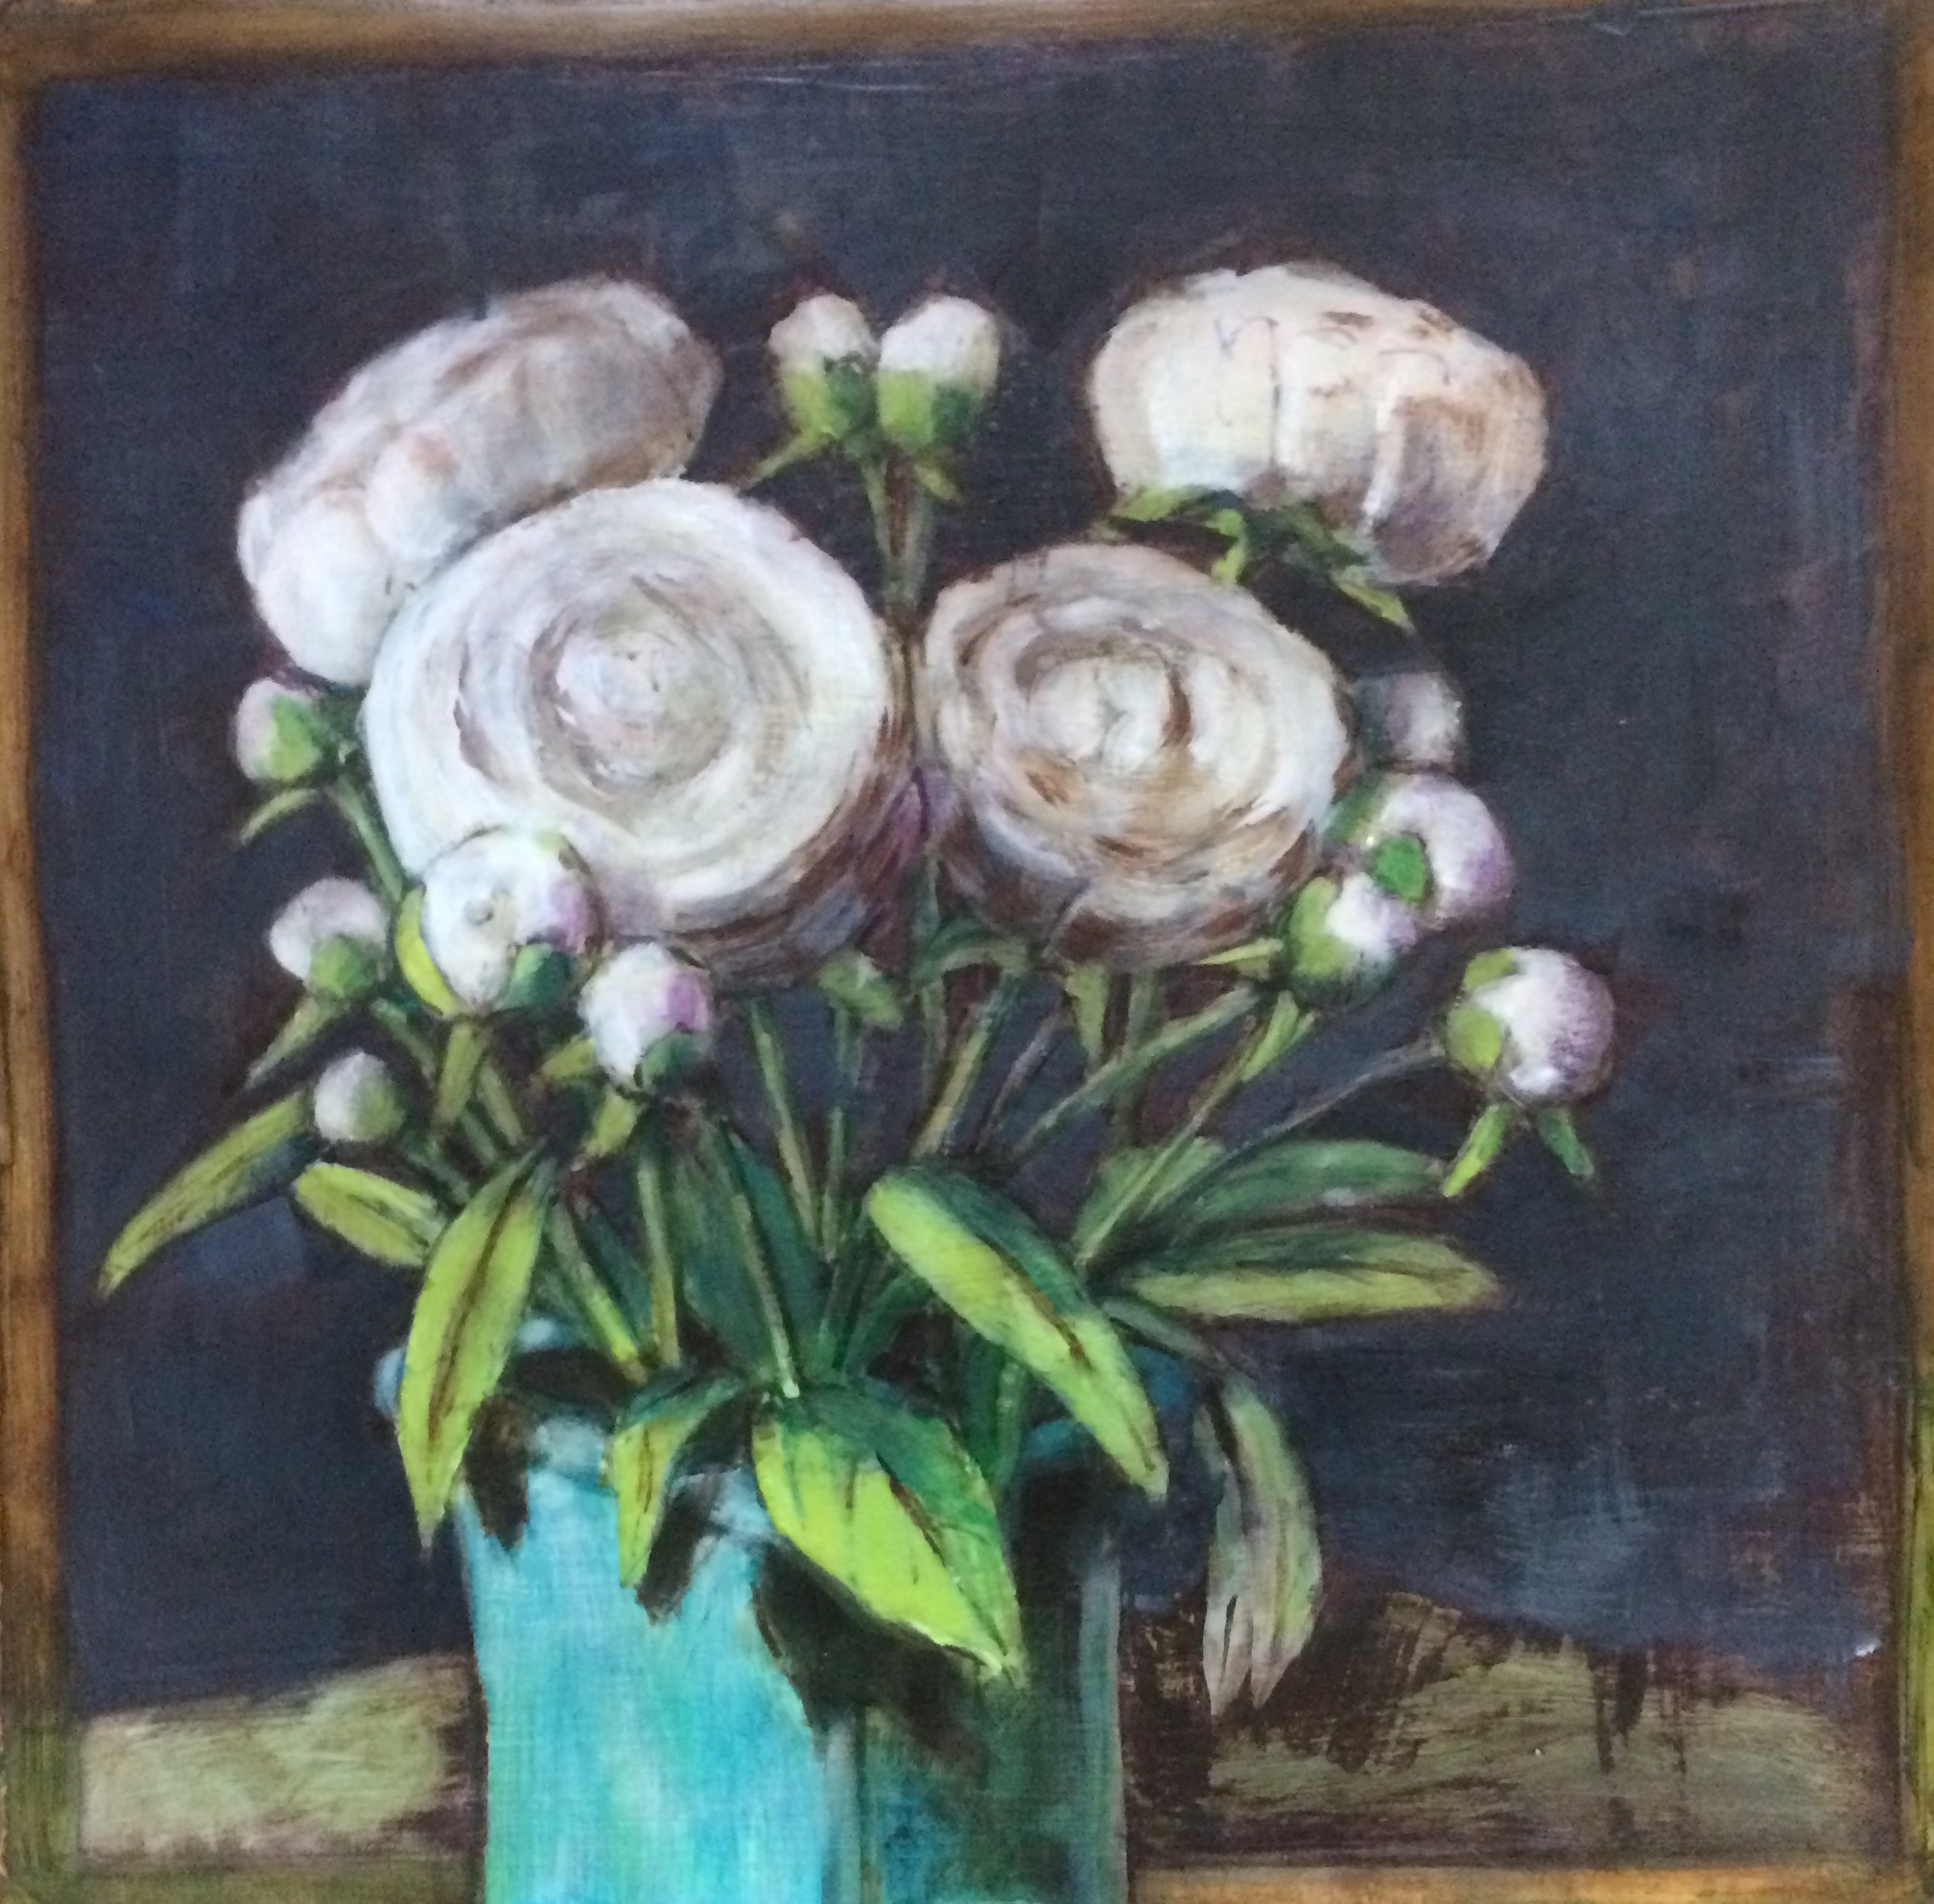 Peonies II. Oil on primed Arches, 14 by 14 inches, 2012